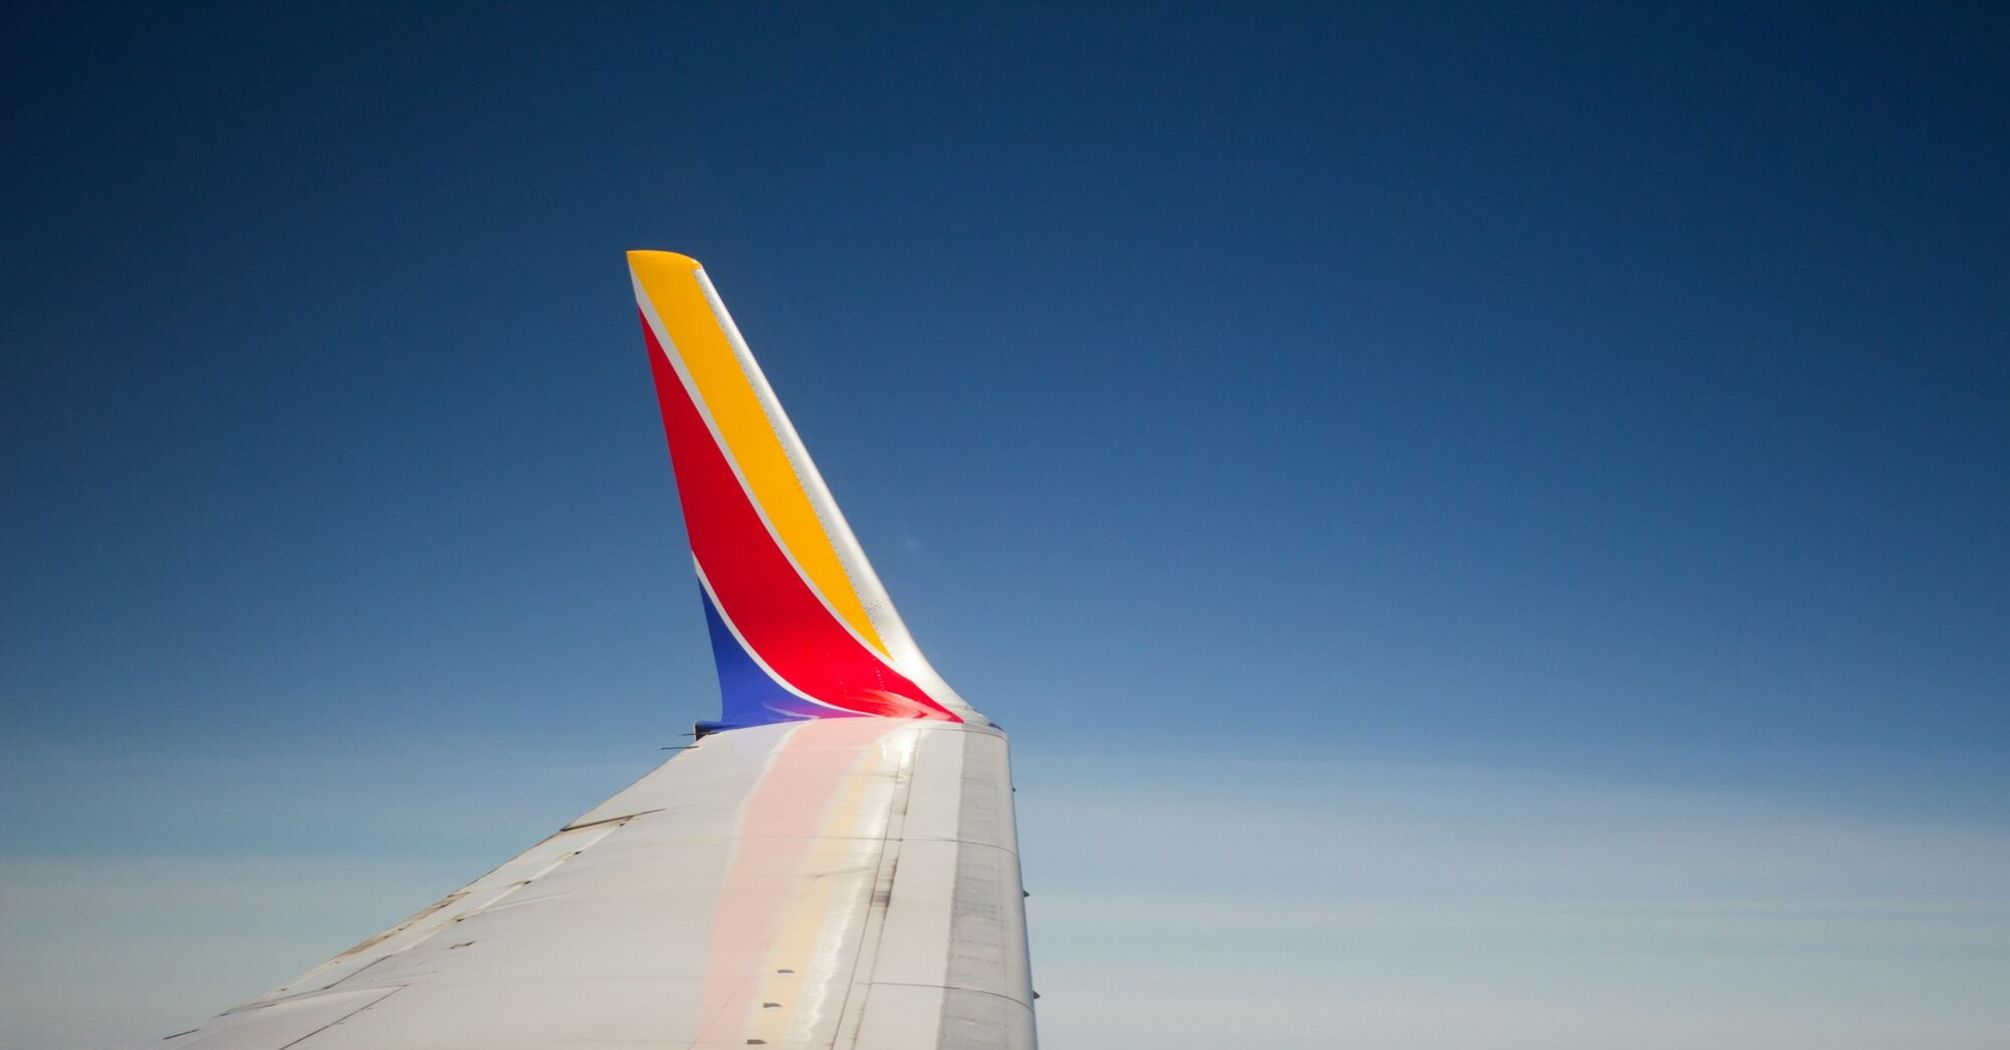 Southwest Airlines wing in flight against a blue sky